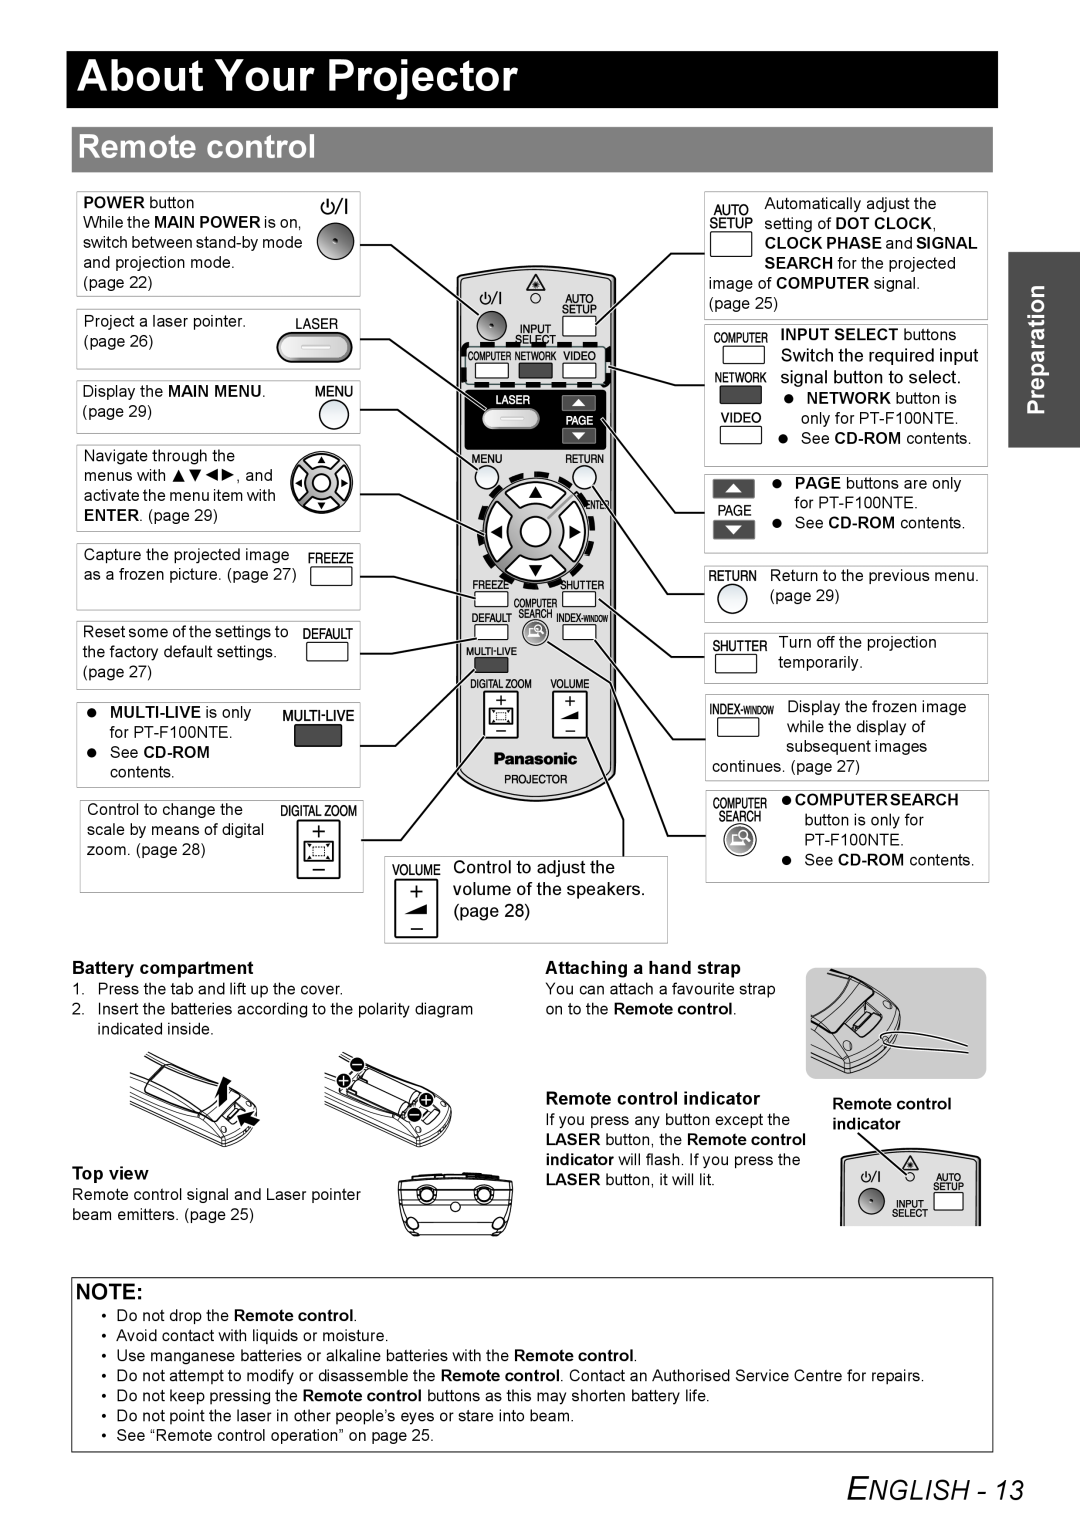 Philips PT-F100NTE manual About Your Projector, Remote control, English, Preparation 